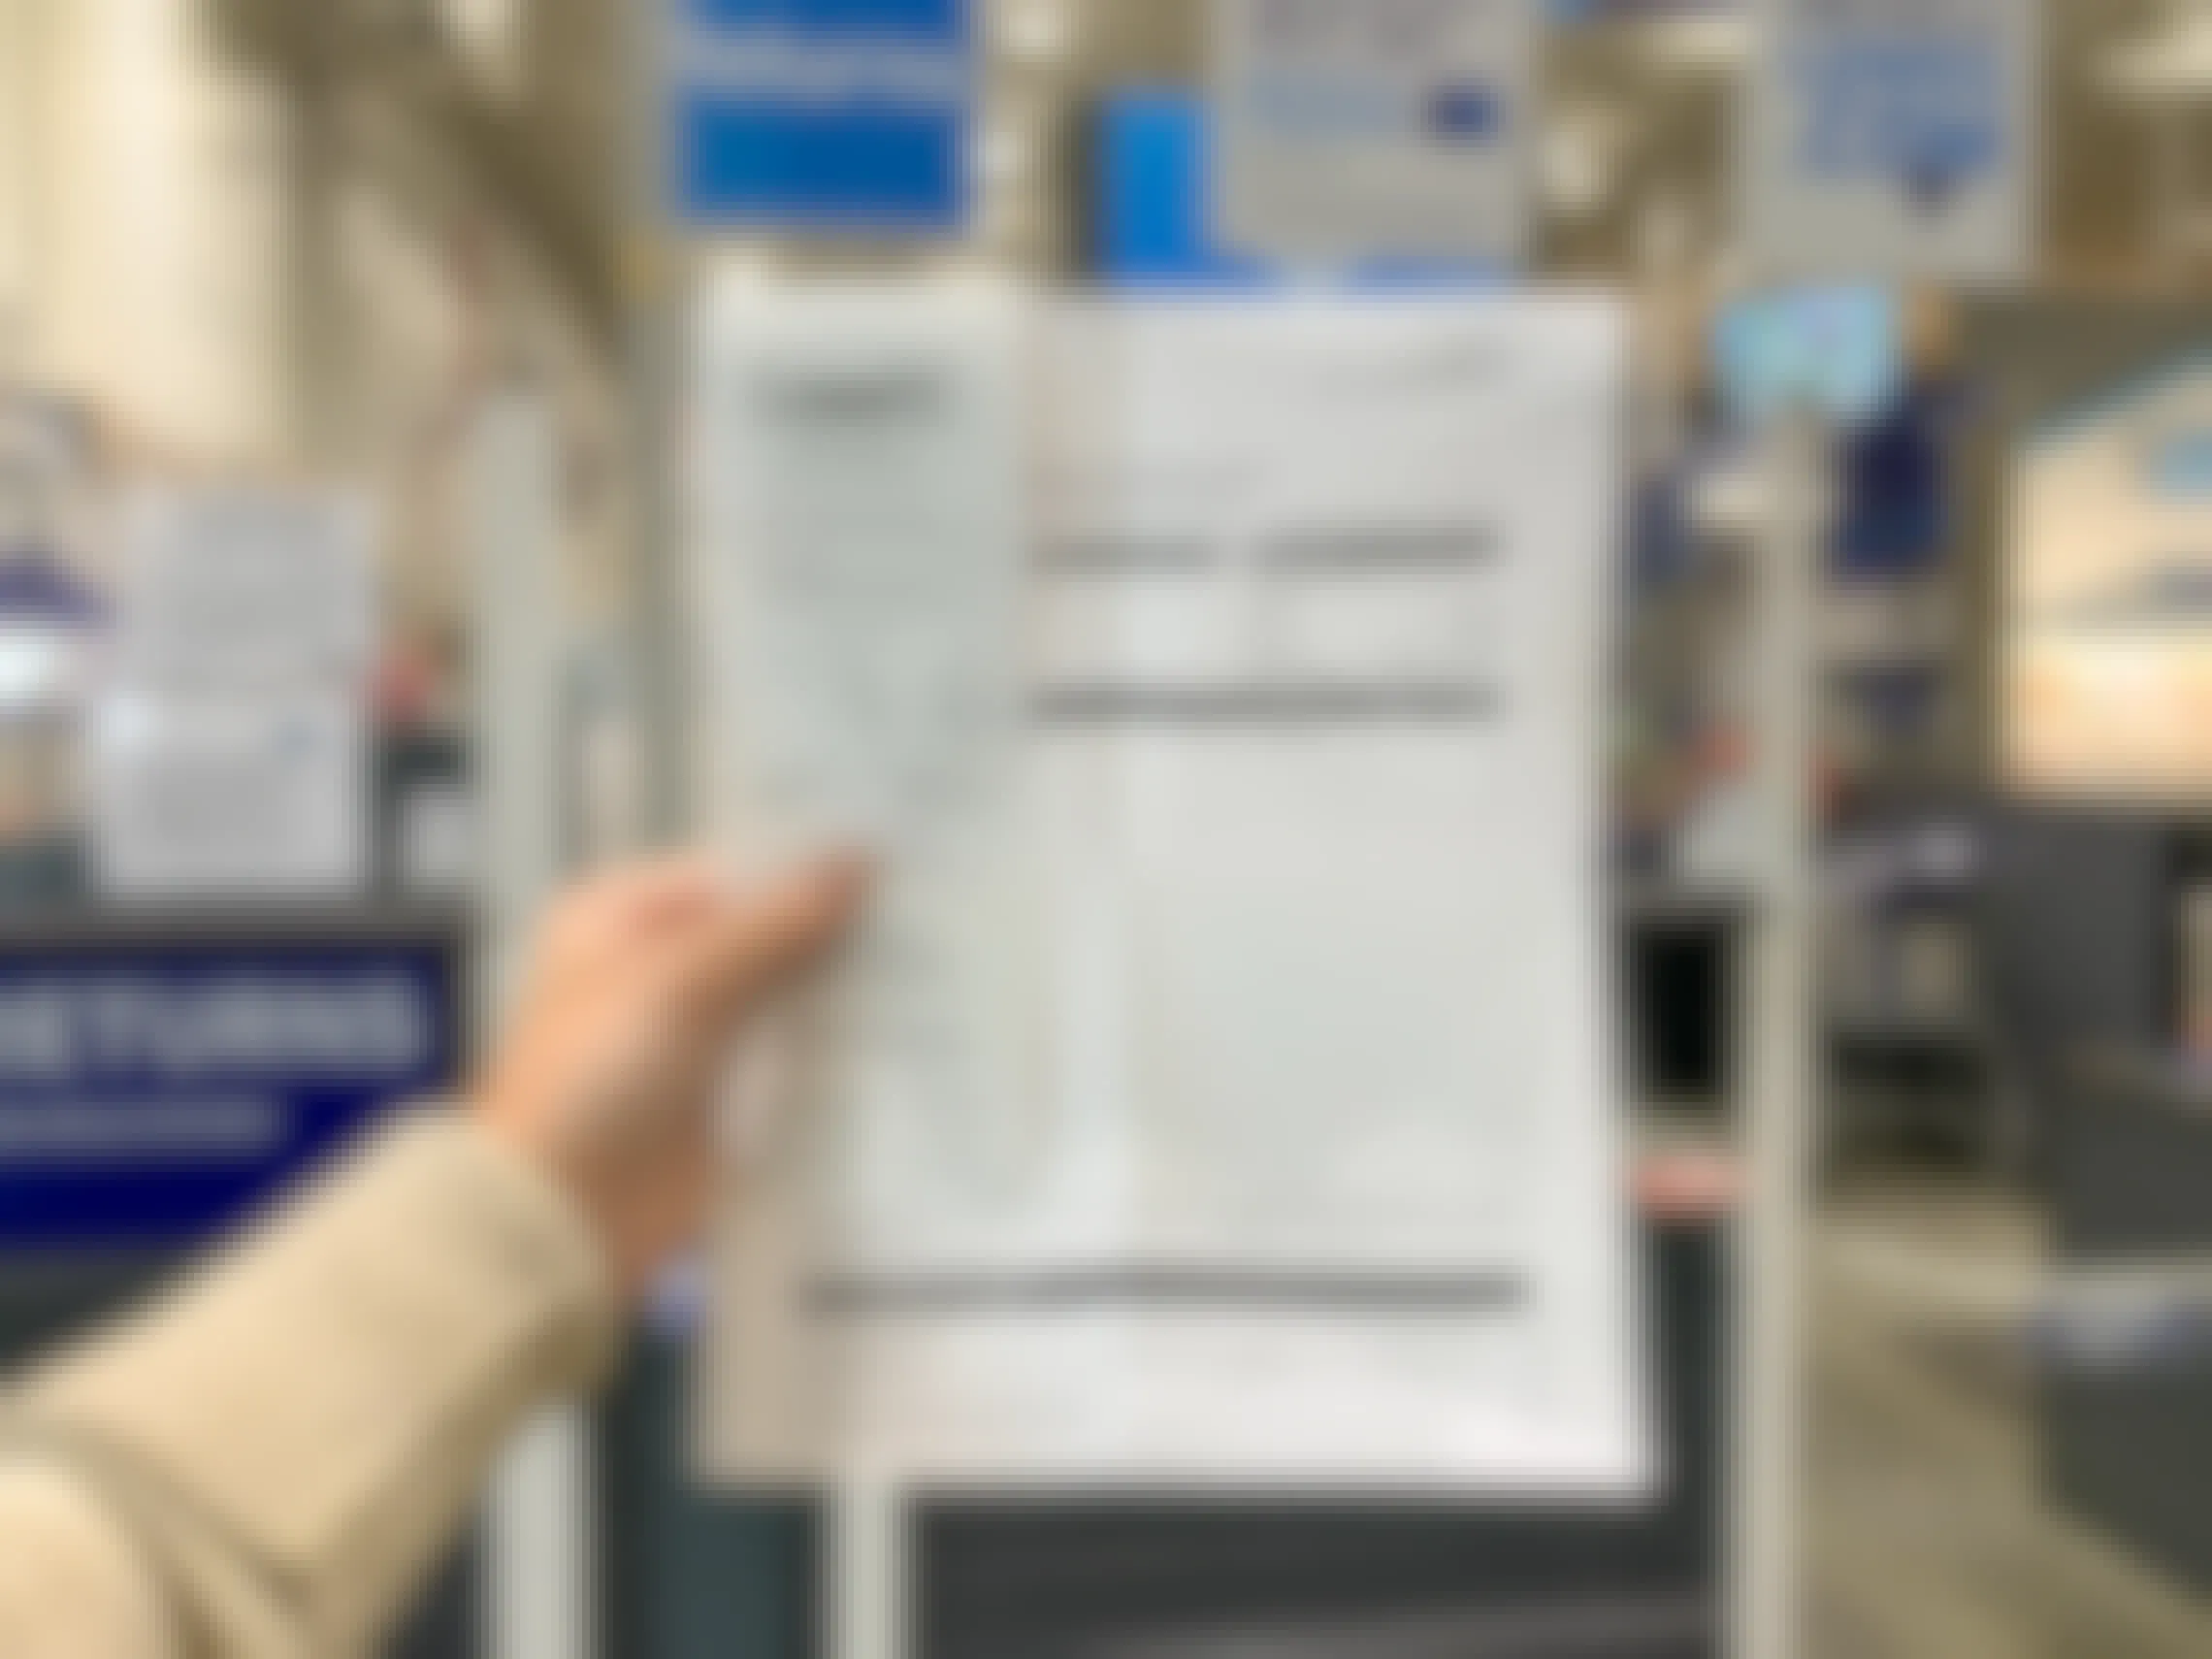 A person's hand holding up their Lowe's black friday return receipt at the Lowe's return counter.